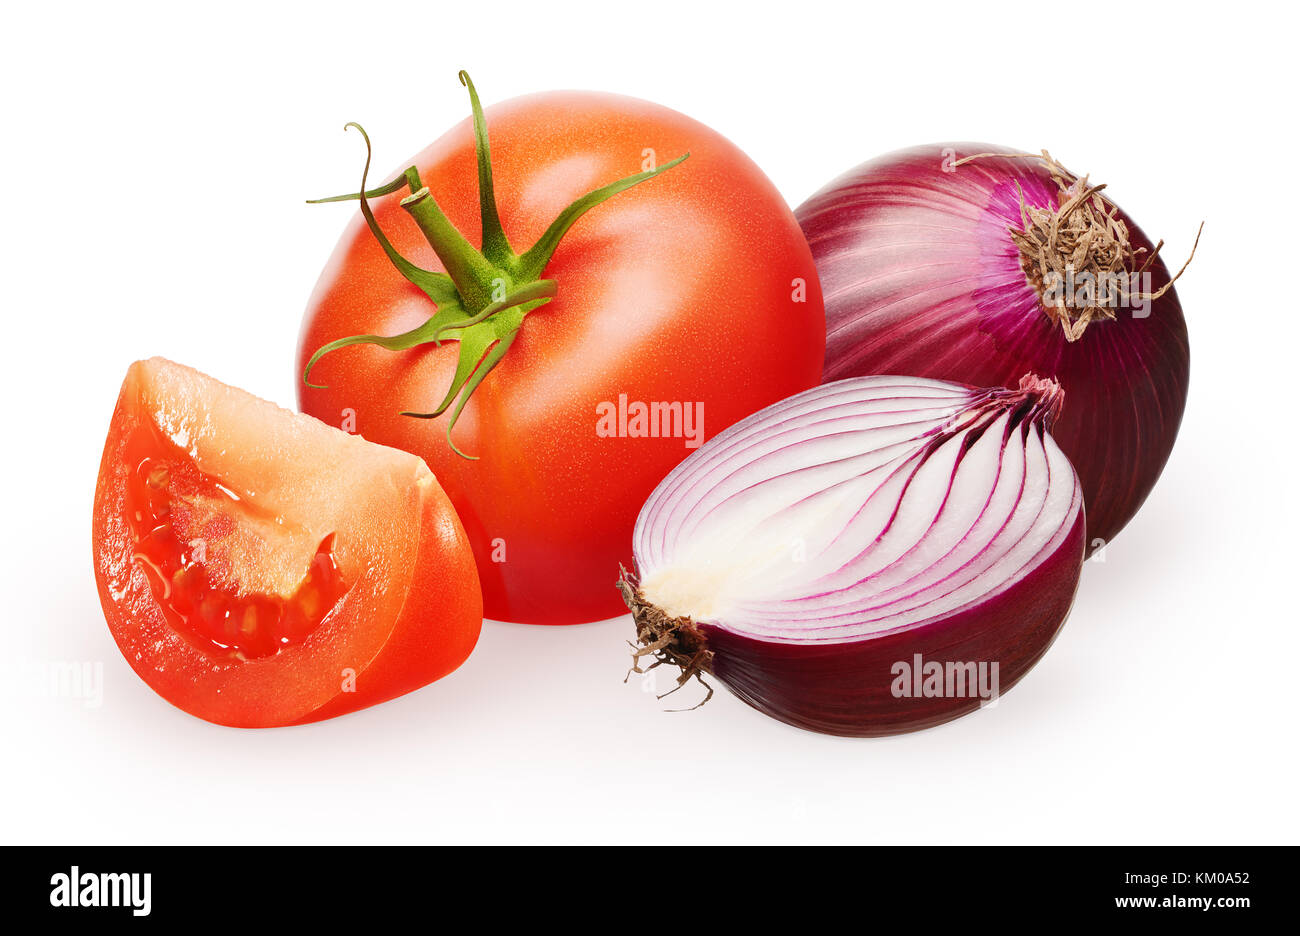 Whole fresh red tomato with green leaf and slice near unpeeled red onion and half isolated on white background Stock Photo